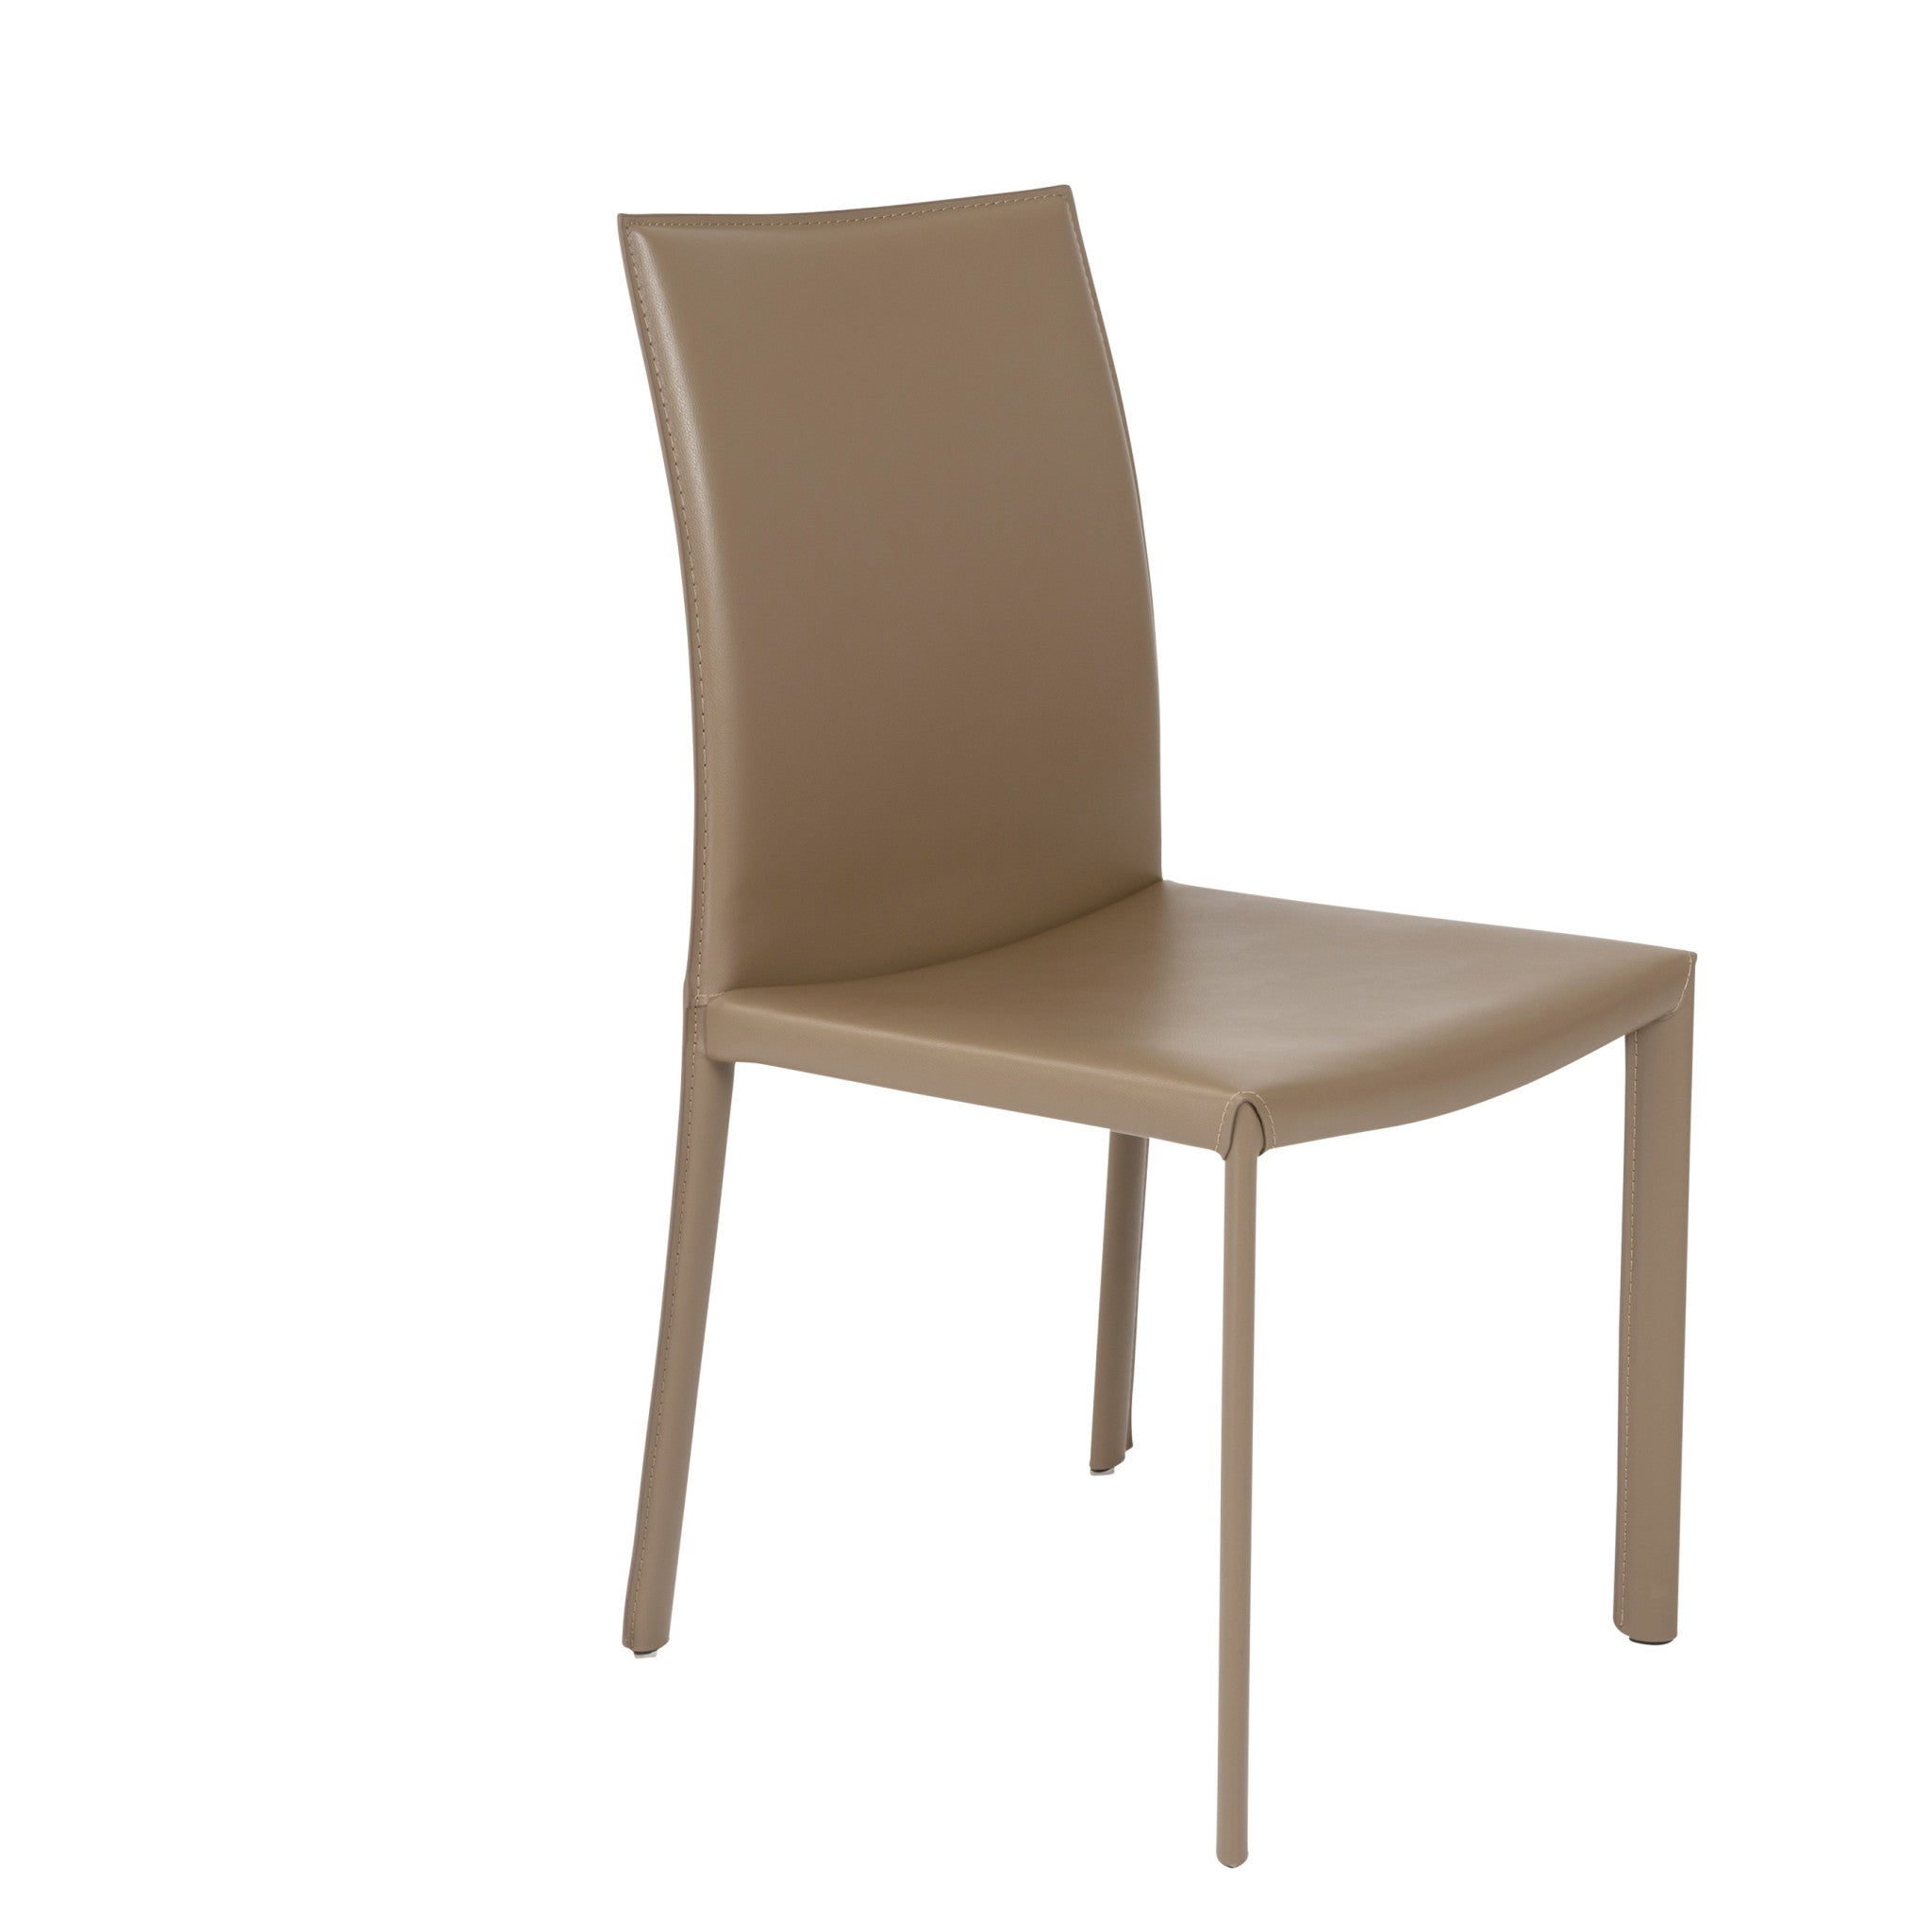 Set of Two Taupe Upholstered Leather Dining Side Chairs